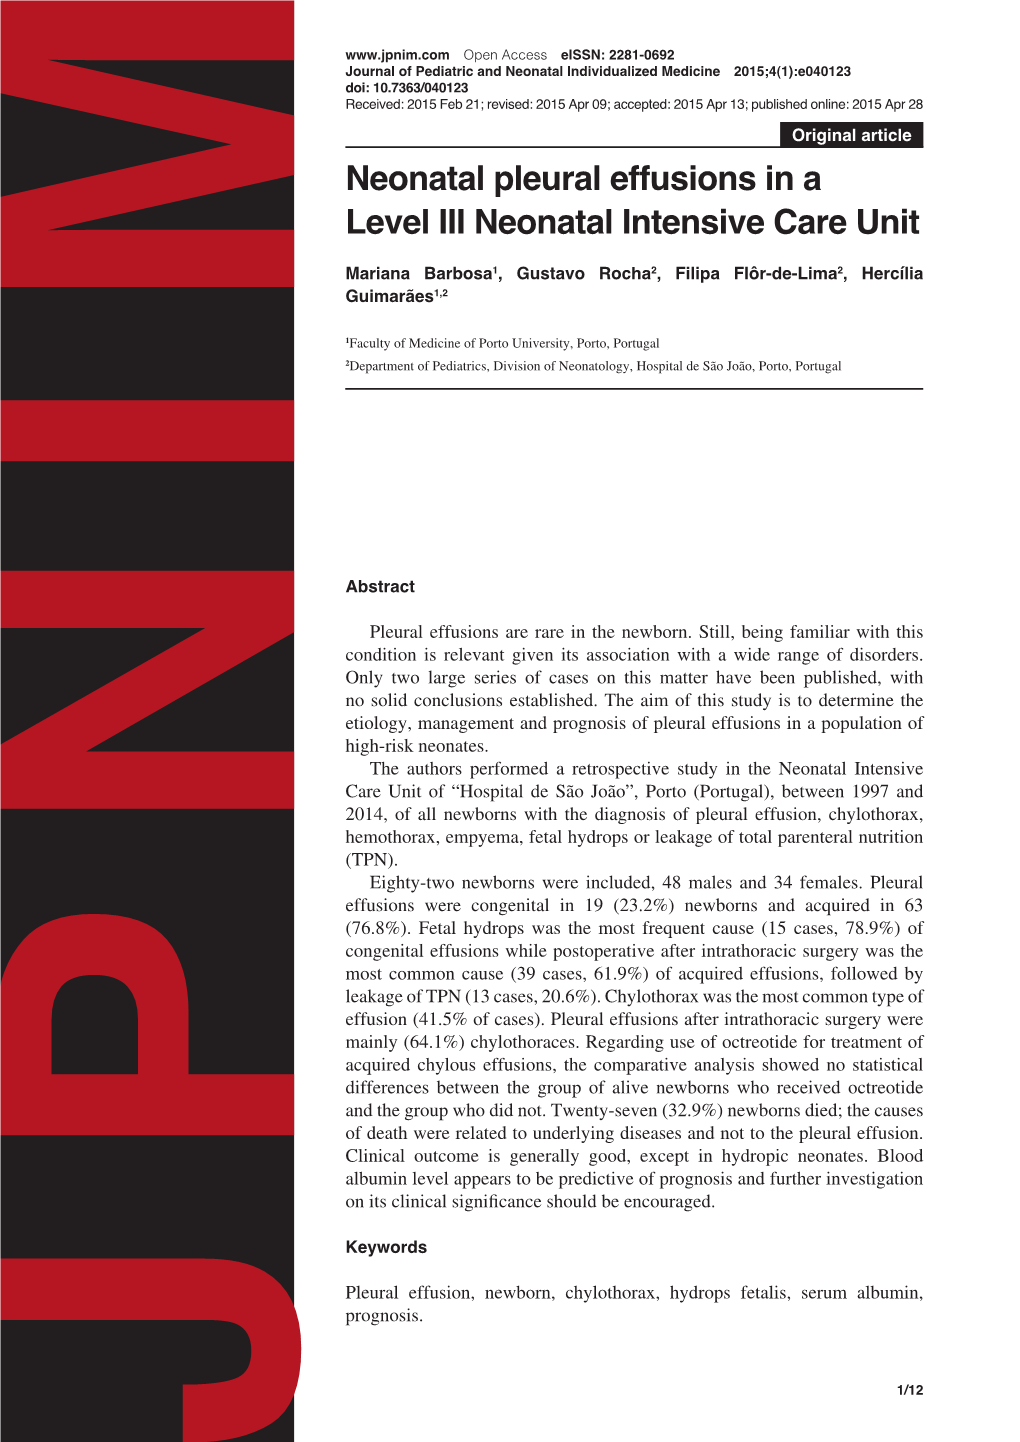 Neonatal Pleural Effusions in a Level III Neonatal Intensive Care Unit